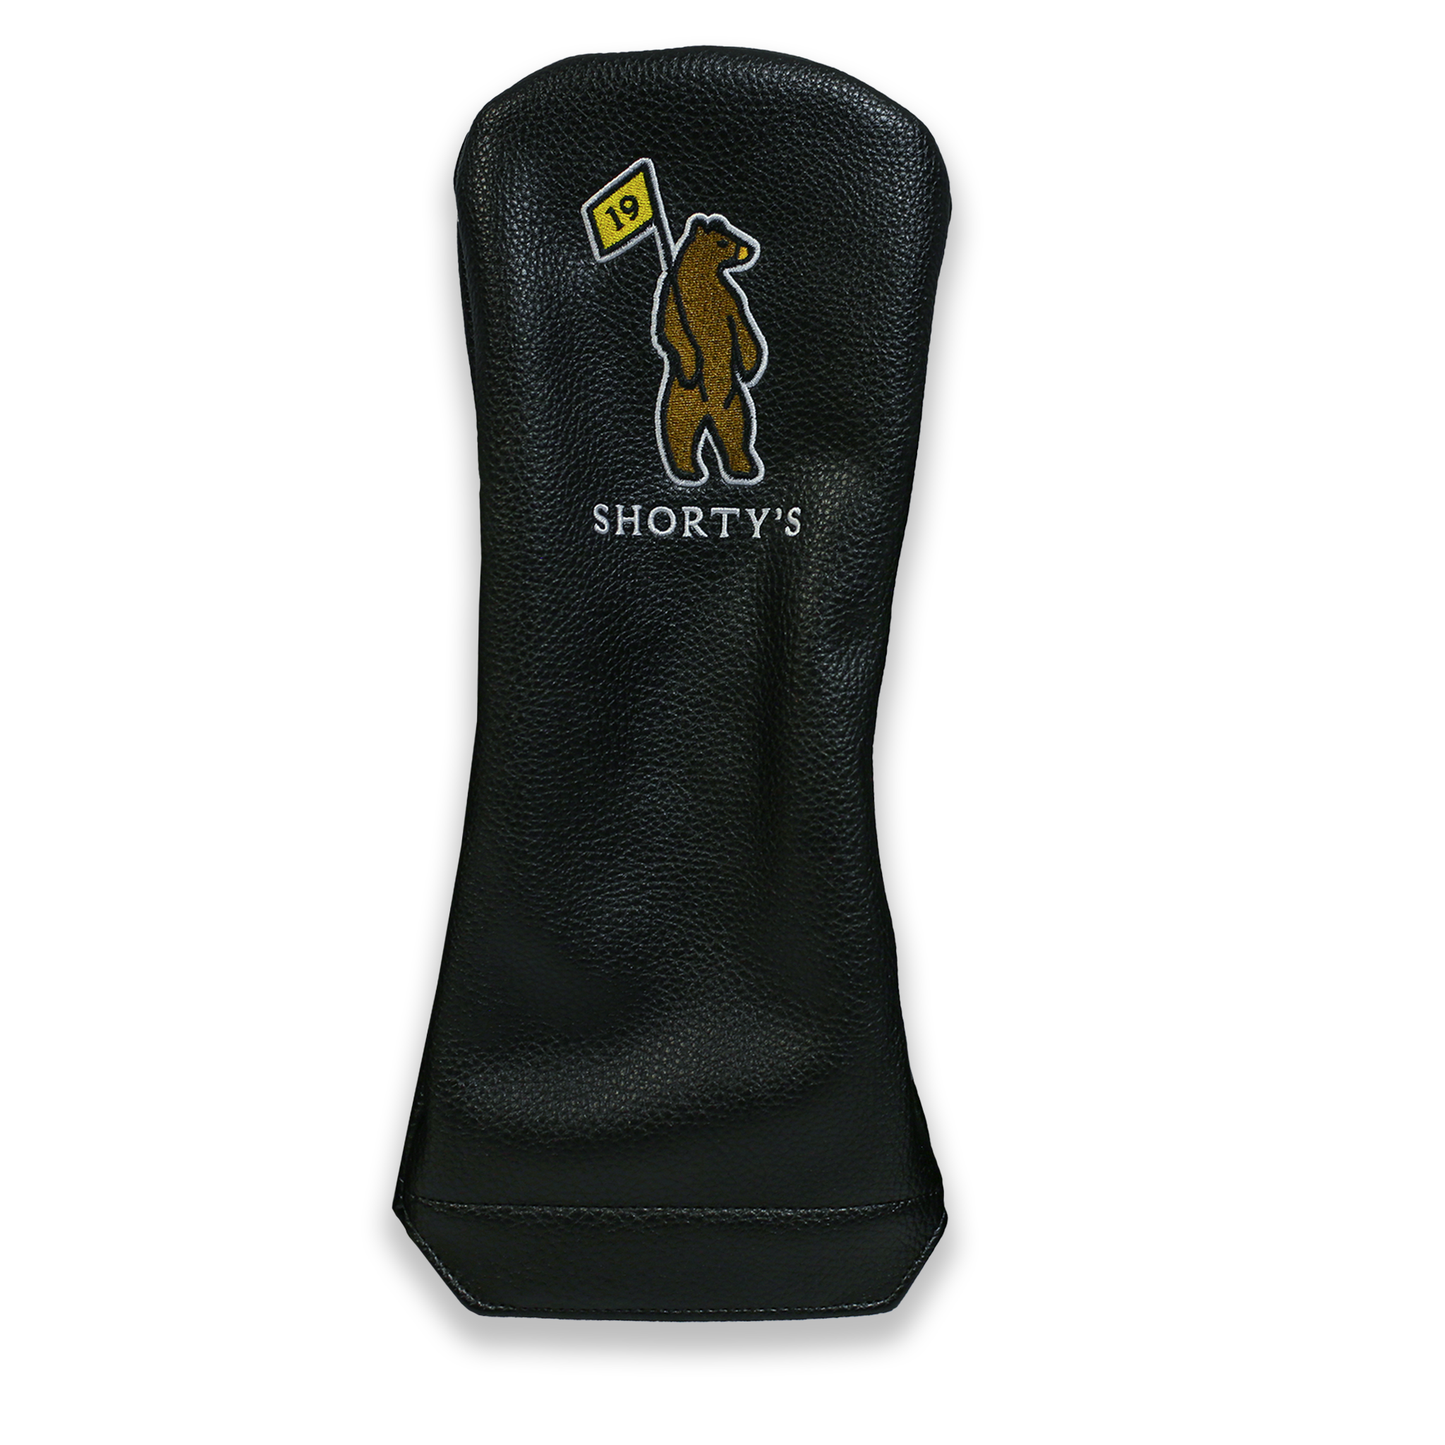 PRG Shorty's Headcover